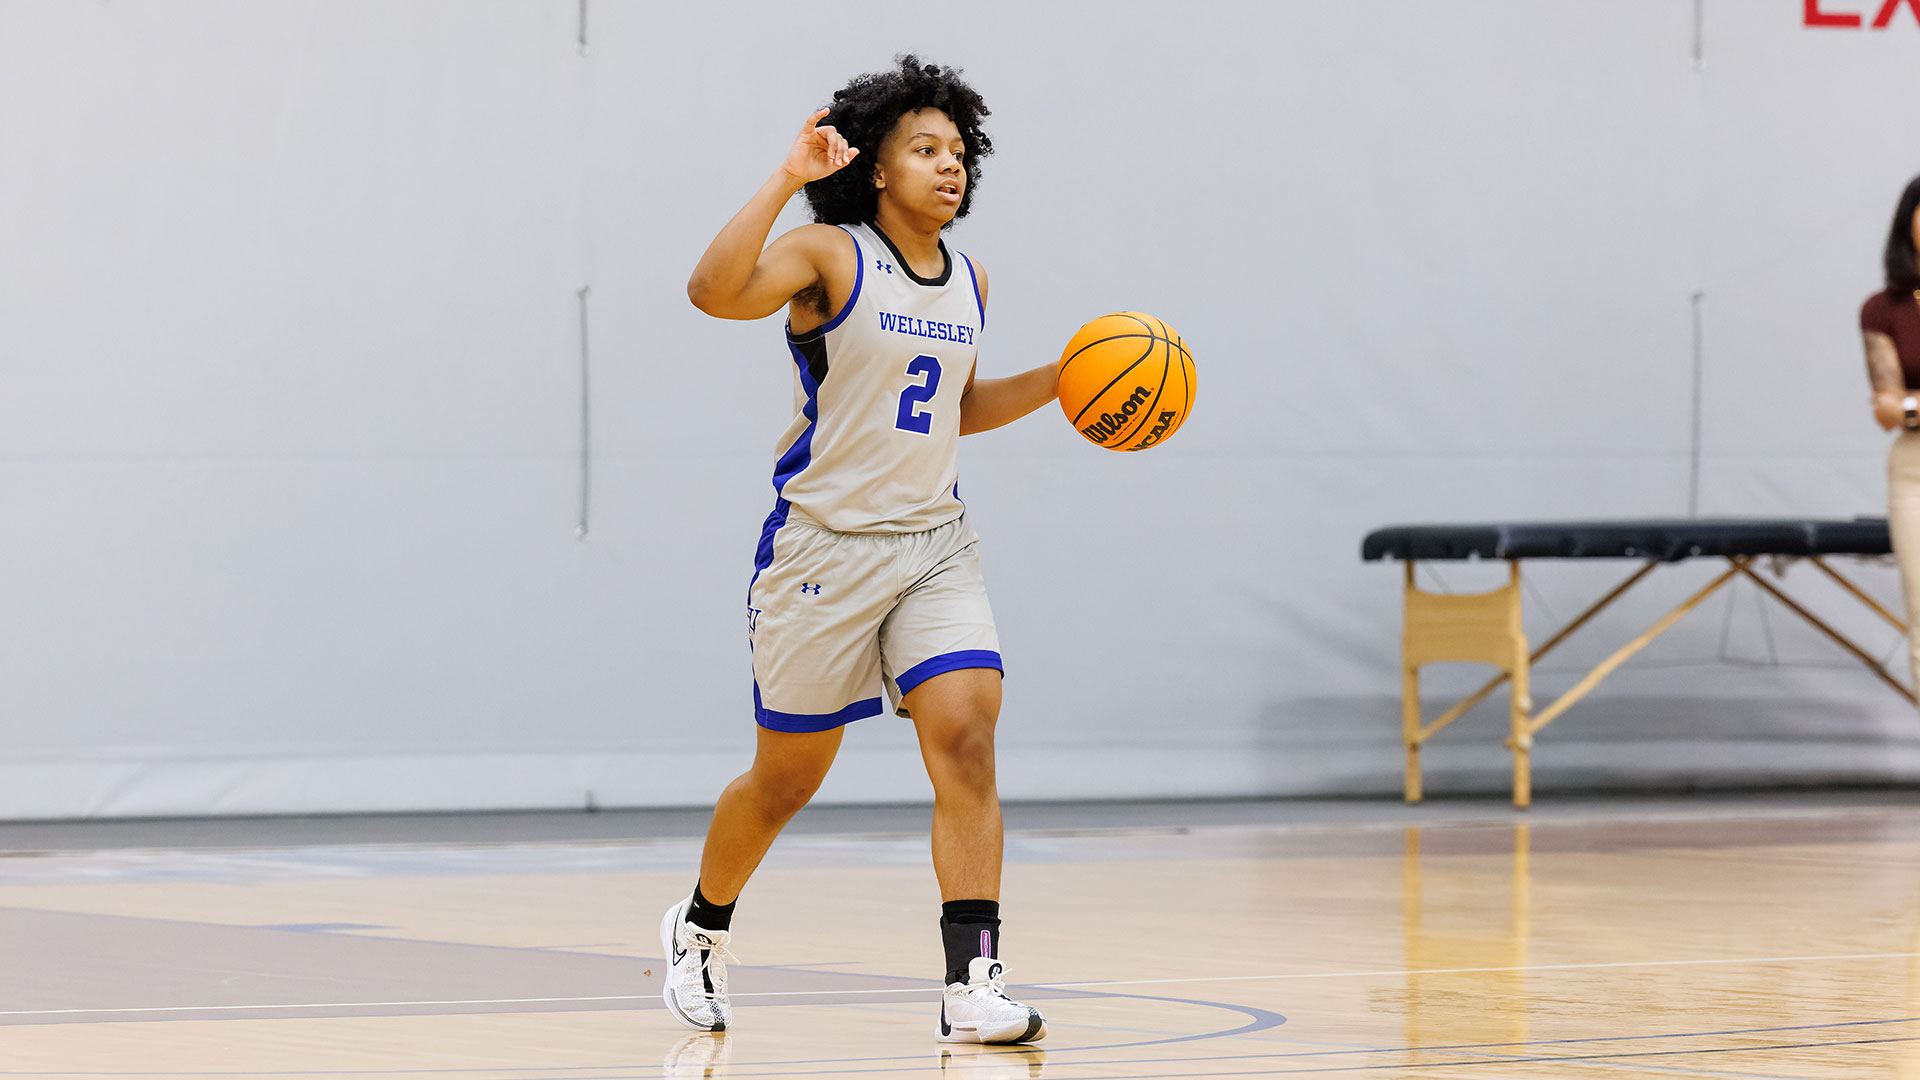 Wellesley Basketball Drops 56-44 NEWMAC Contest to Wheaton